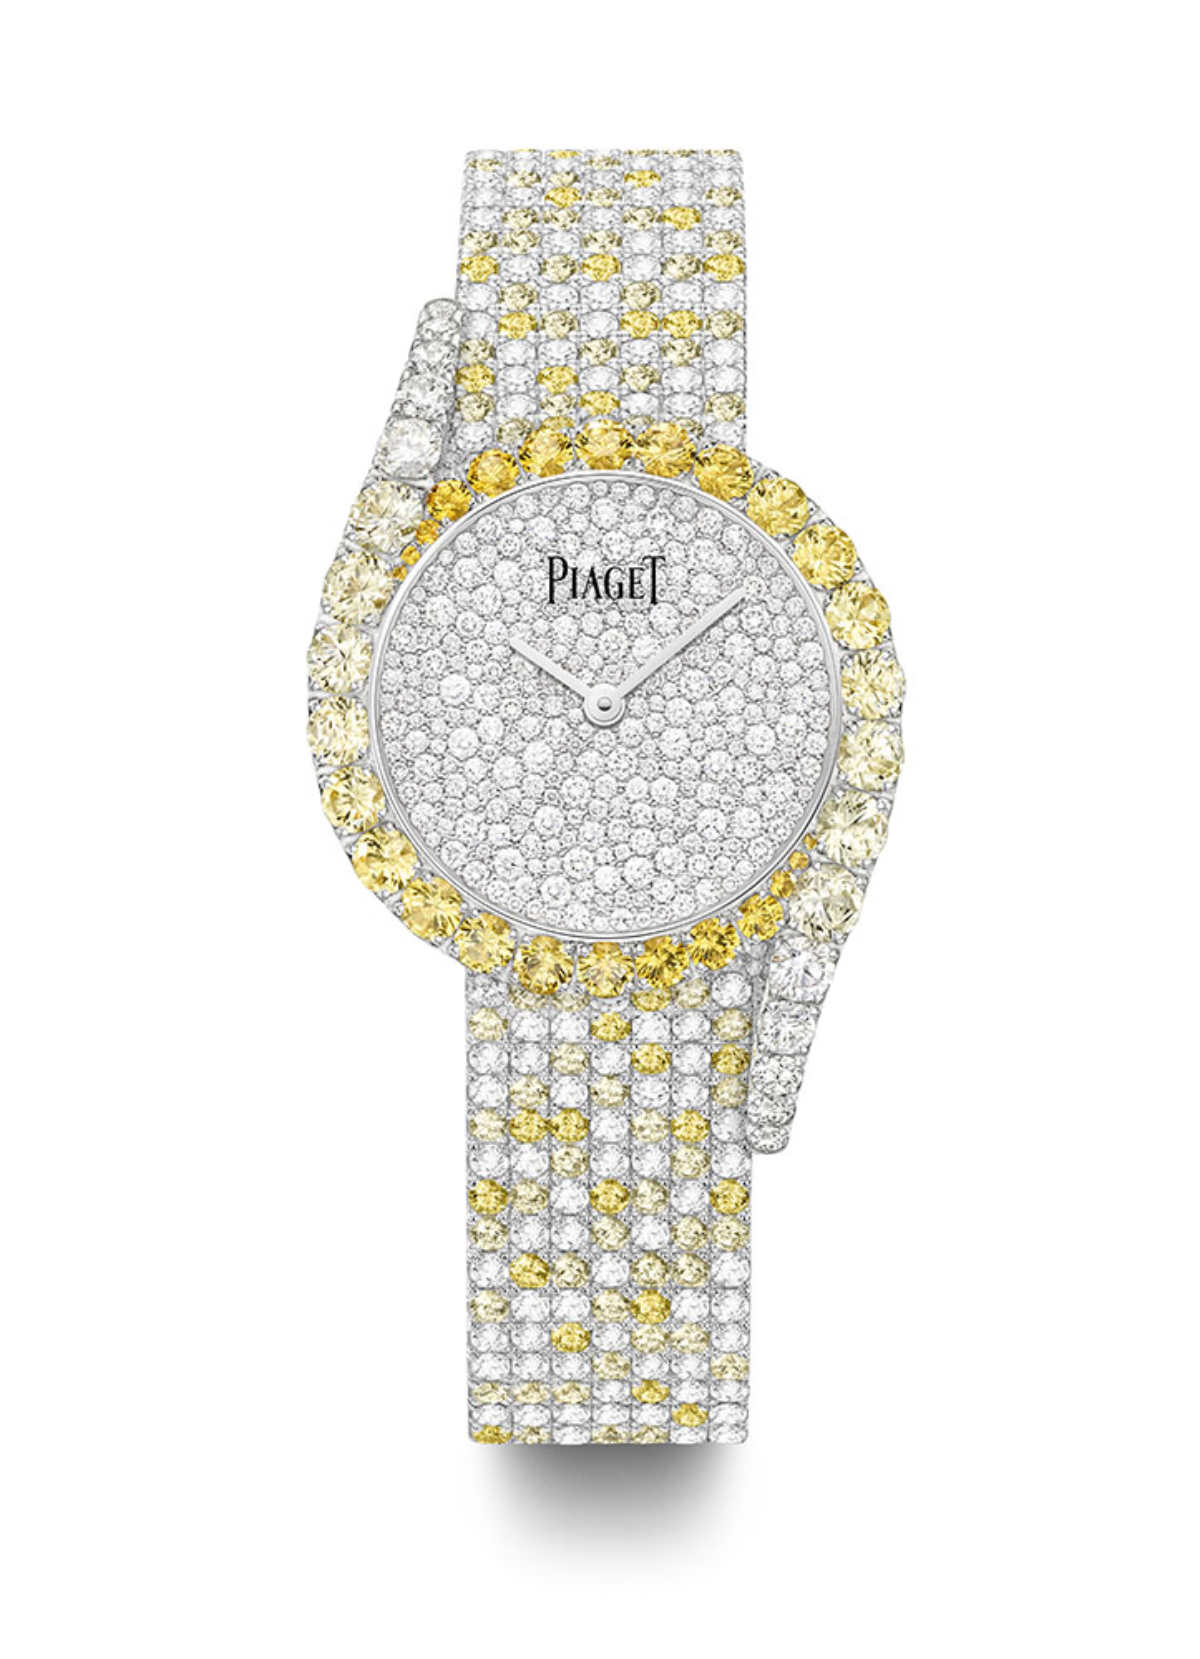 Piaget Presents Its New Sunlight Collection